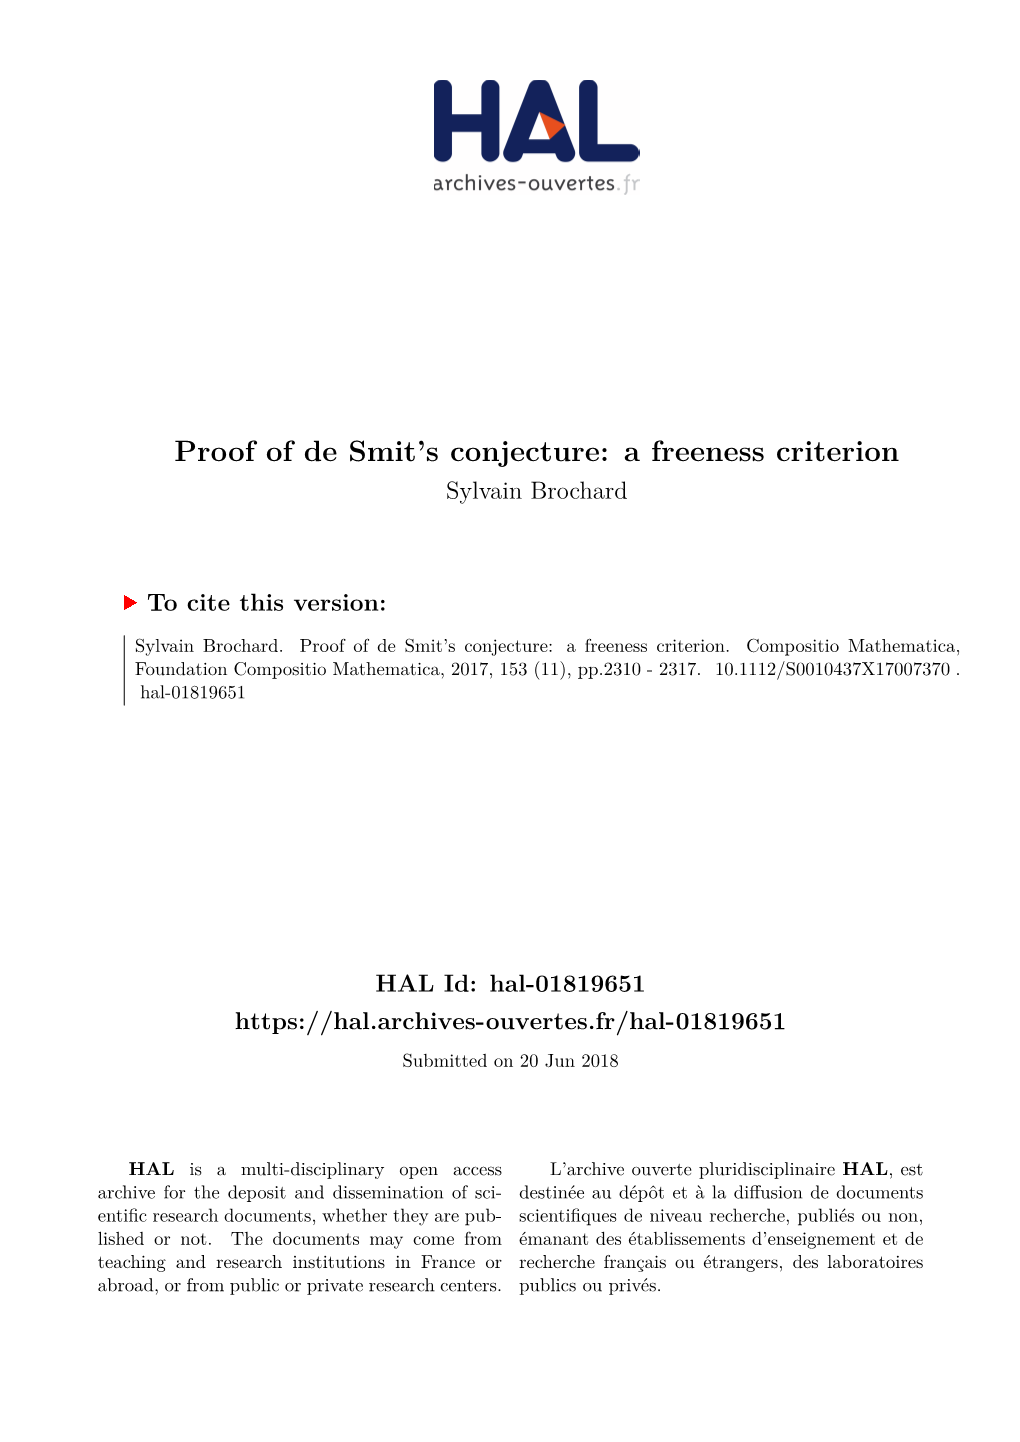 Proof of De Smit's Conjecture: a Freeness Criterion